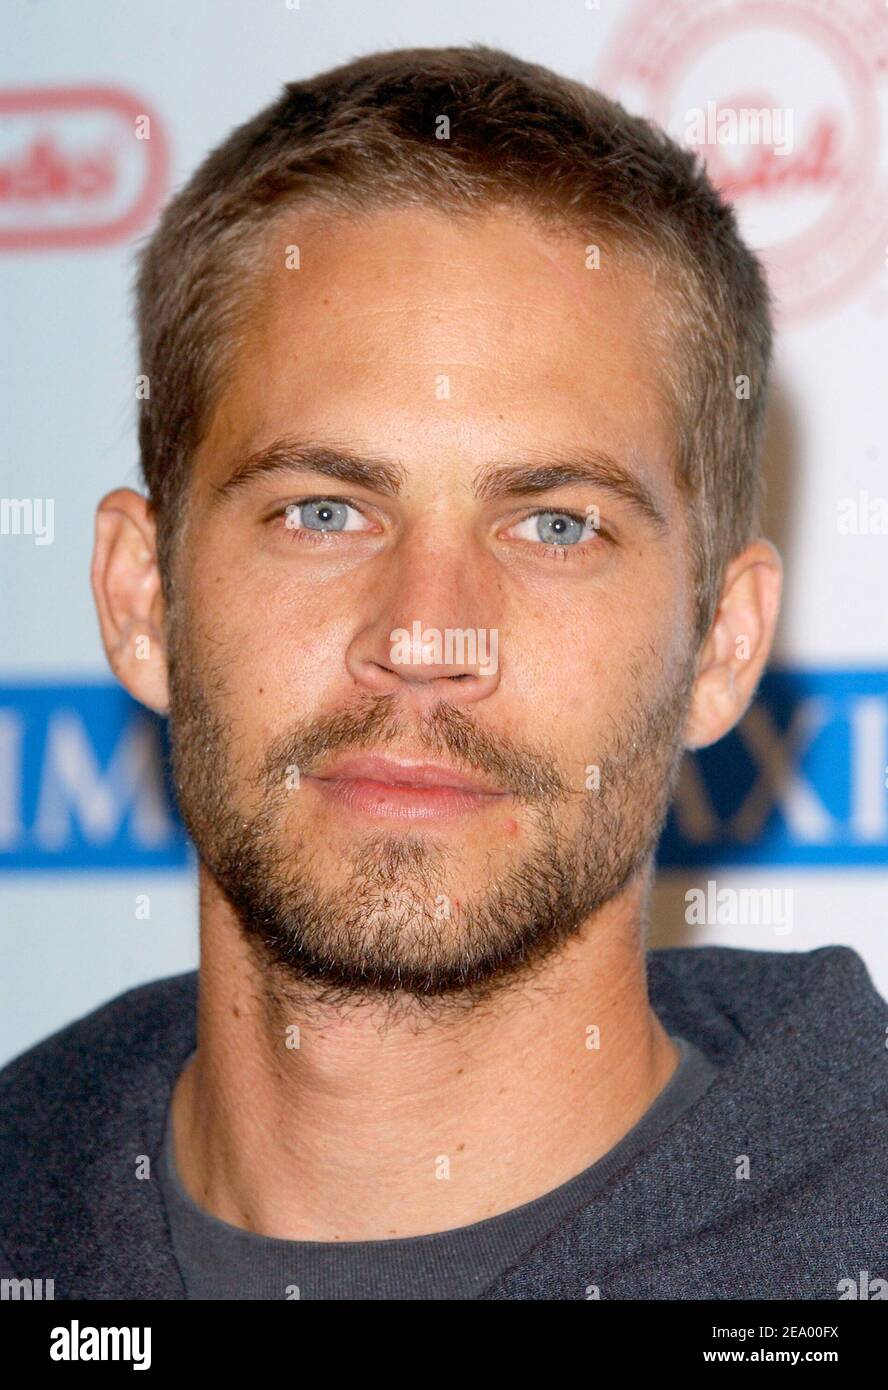 US actor Paul Walker who starred in the Fast & Furious series of action  films has been killed in a car crash in California on November 30, 2013. A  statement on his